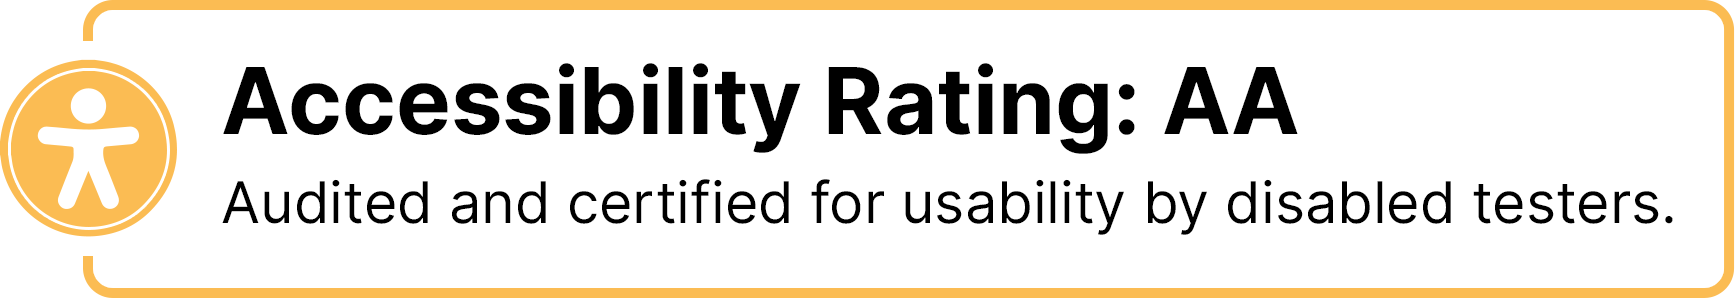 Accessibility Rating: AA, Audited and certified for
   usability by disabled testers.